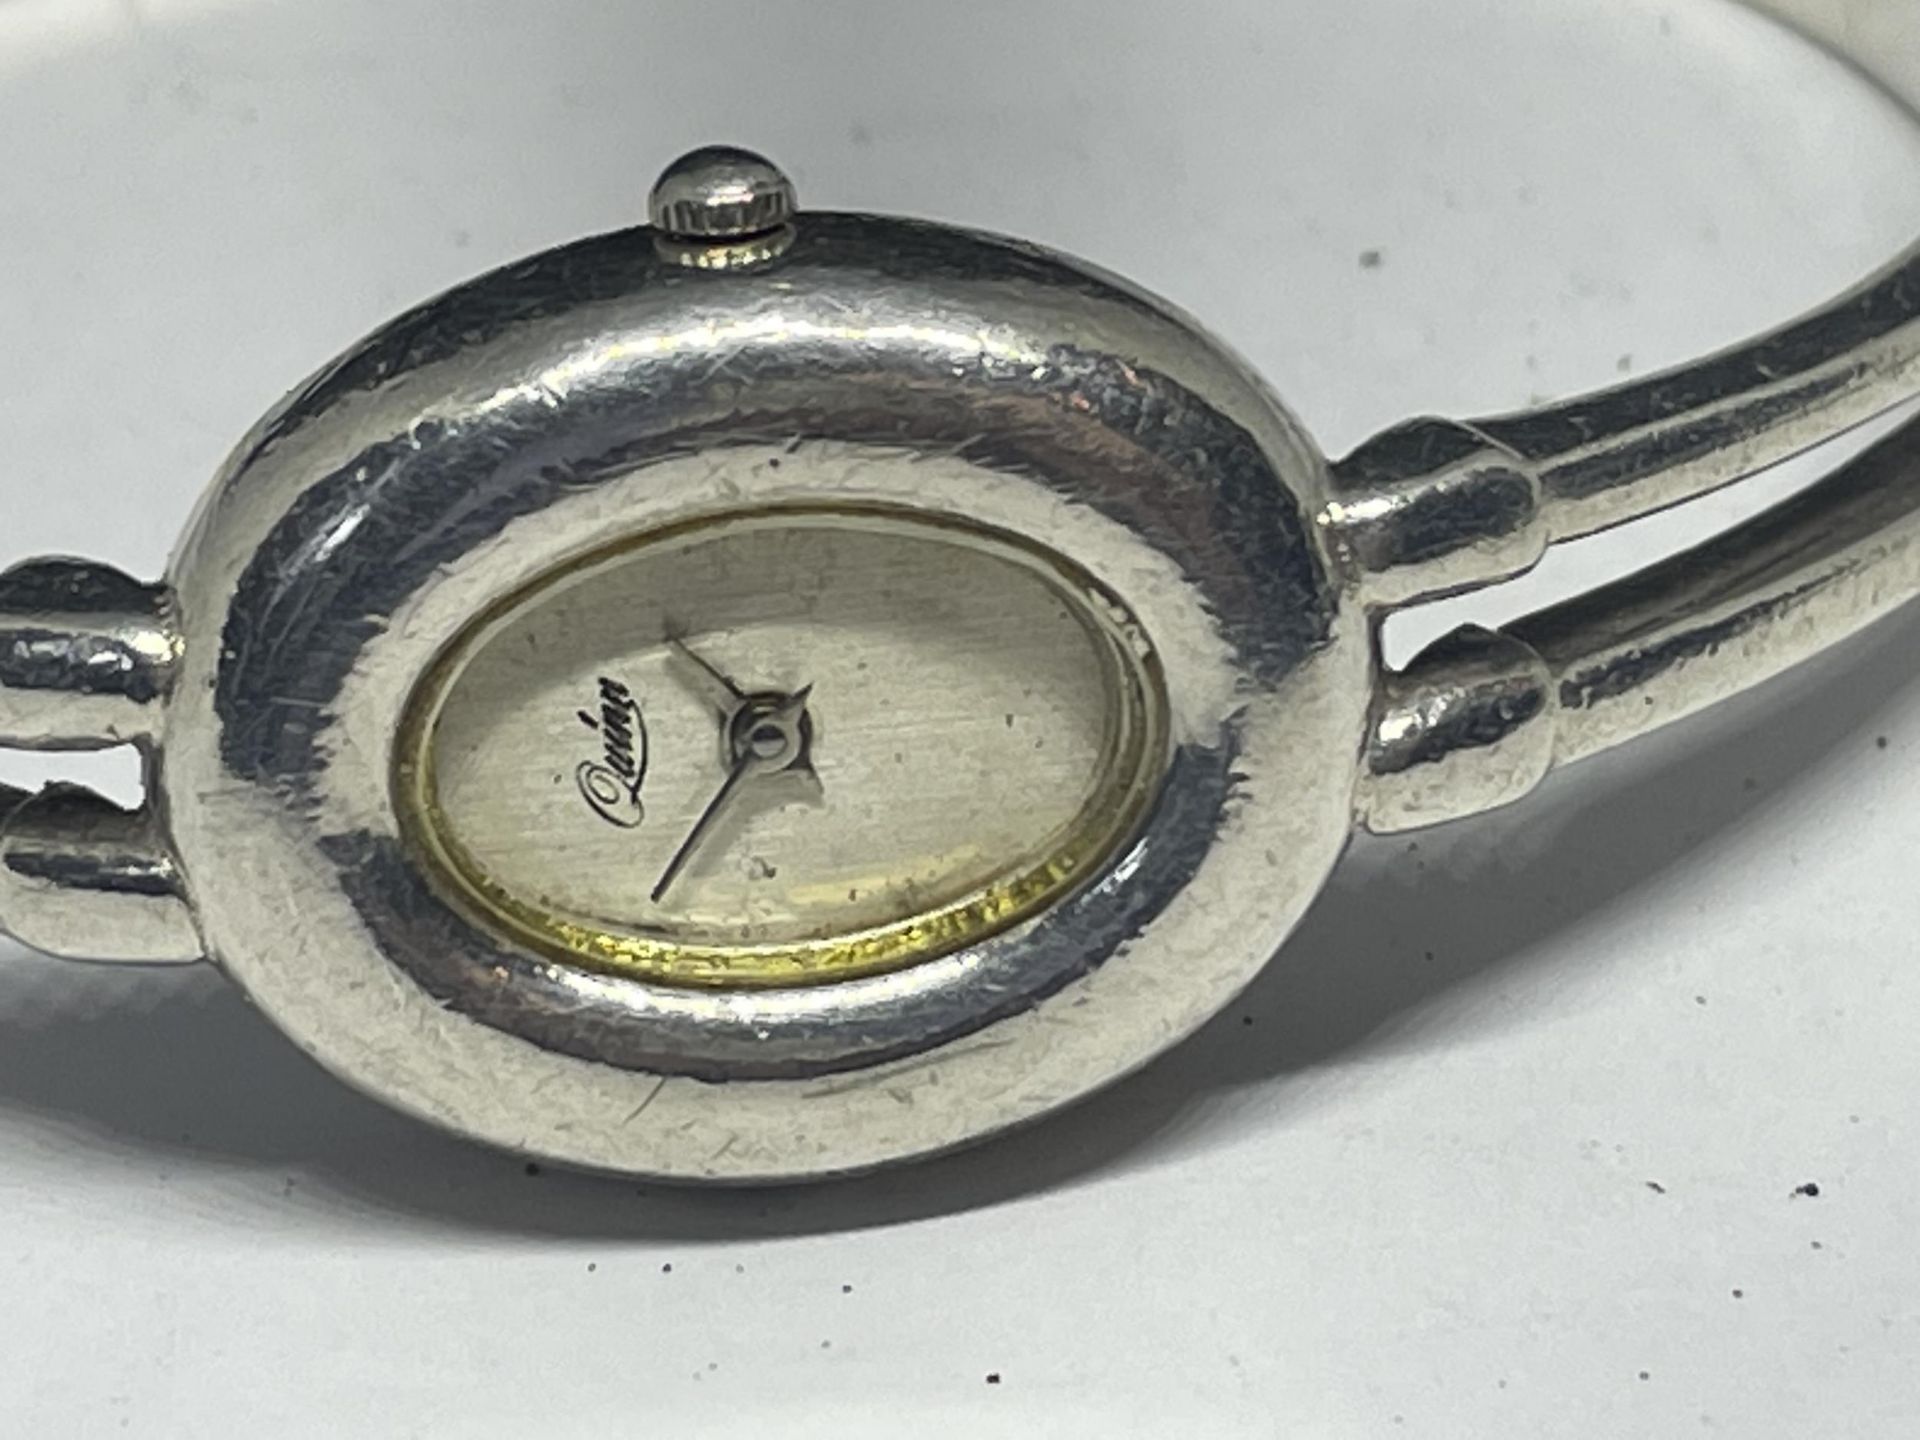 A QUINN .925 SILVER BANGLE WRIST WATCH - Image 2 of 2